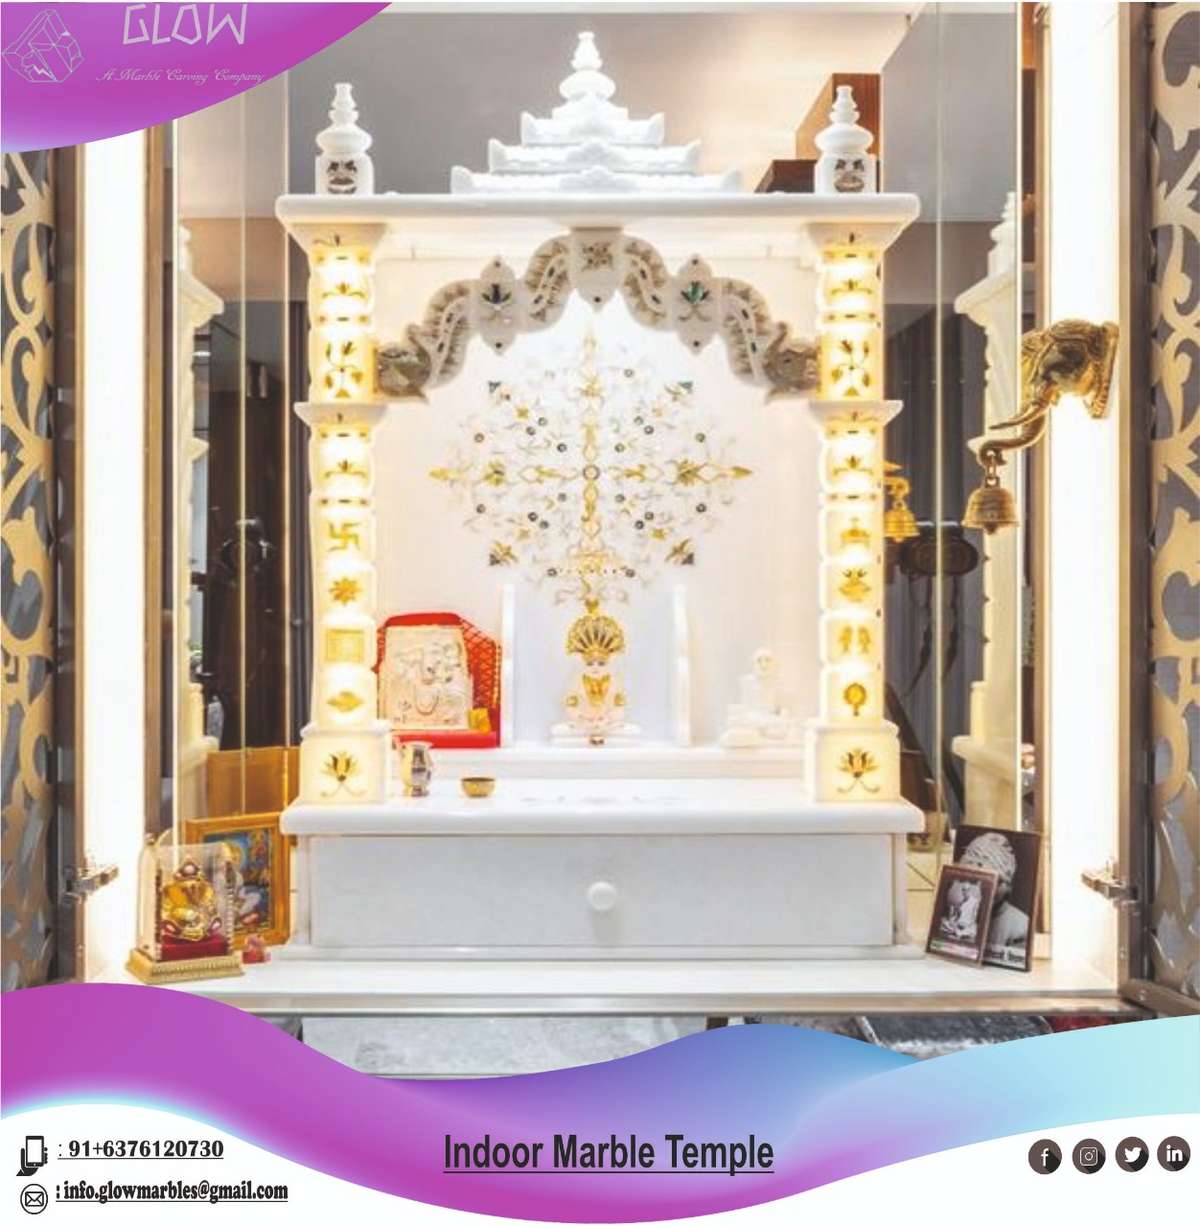 Prayer Room, Storage Designs by Building Supplies Glow Marble A Marble Carving Company, Jaipur | Kolo